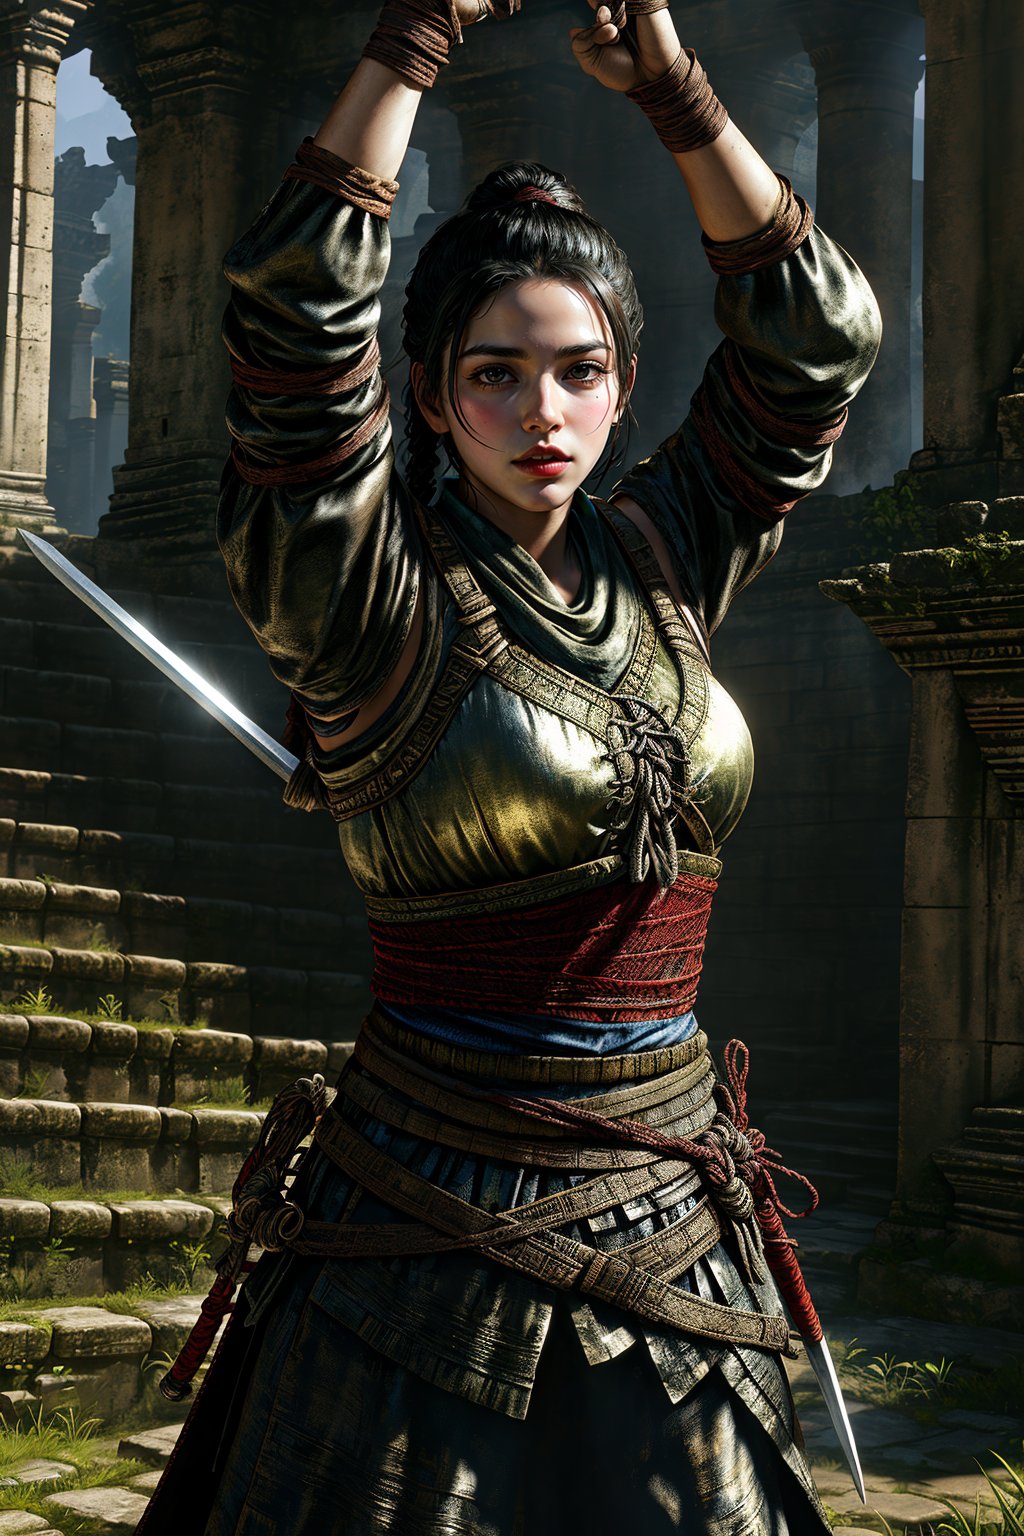 A heroic figure stands proudly before ancient temple ruins, her worn leather armor and intricately tied belt whipping wildly as she holds aloft a gleaming katana, its curved blade reflecting the warm sunlight casting a dramatic shadow on the weathered stone steps.